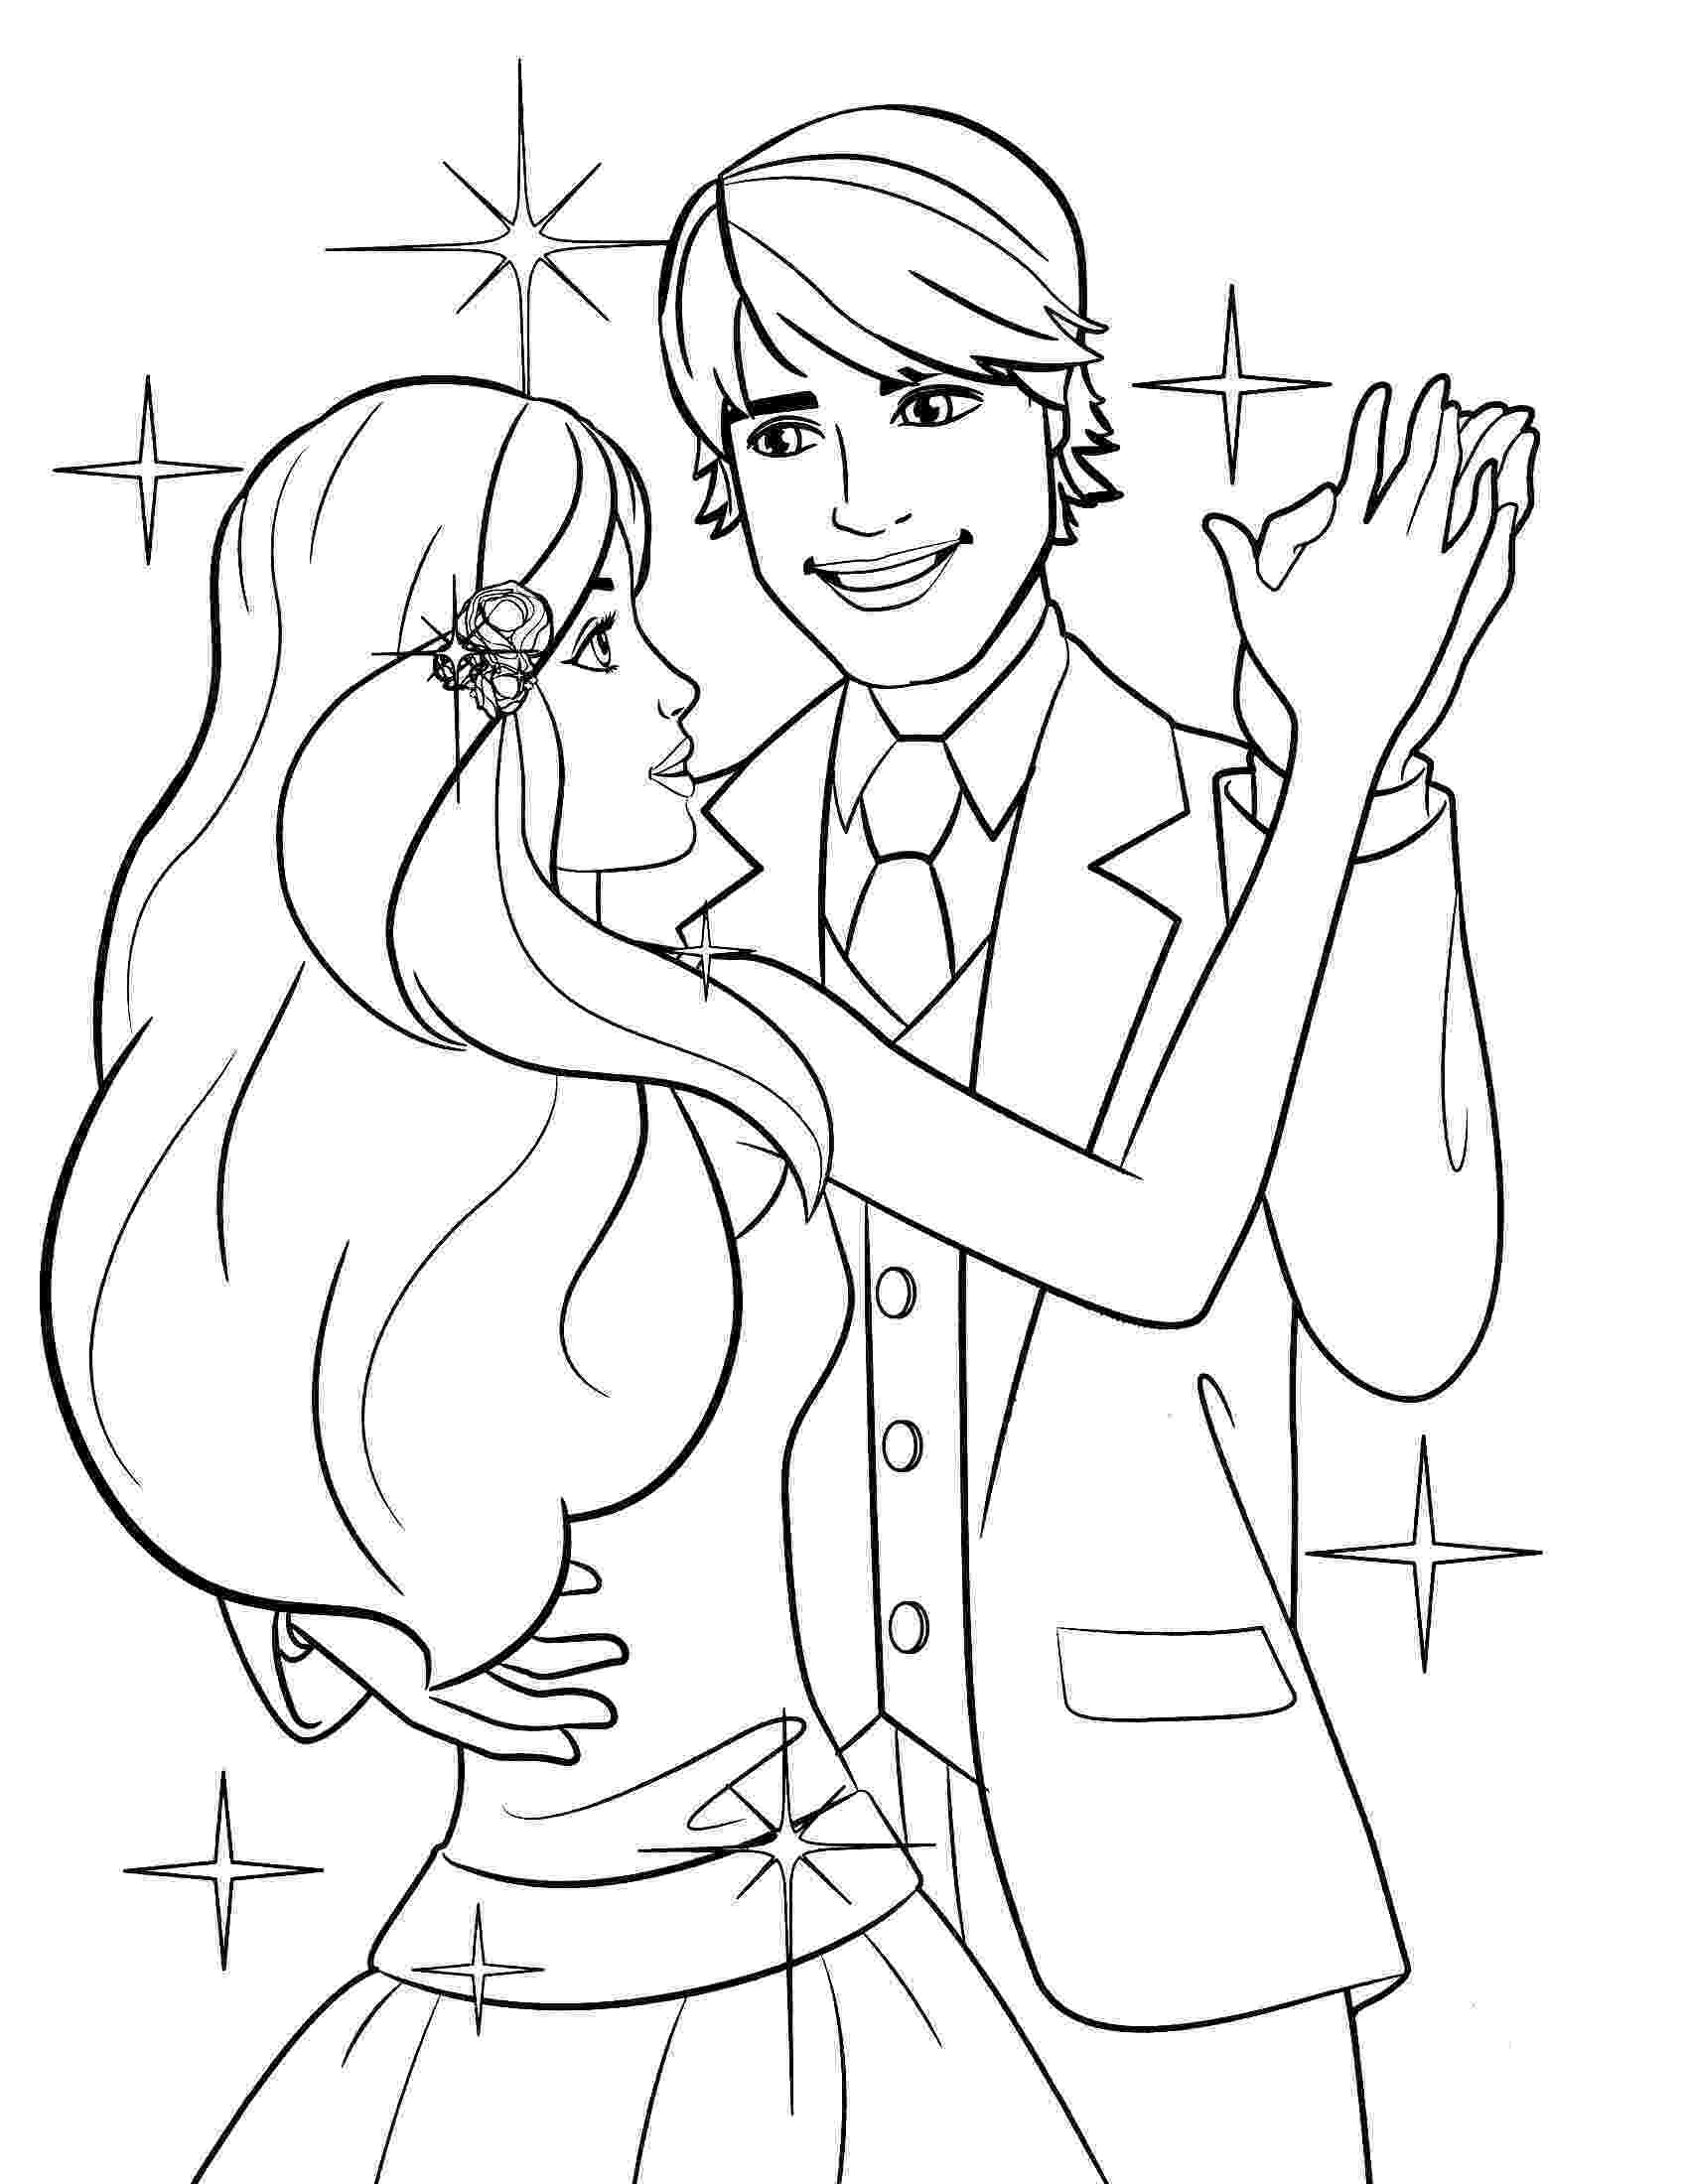 printable coloring sheets wedding 1000 images about wedding coloring book for the kids on wedding coloring printable sheets 